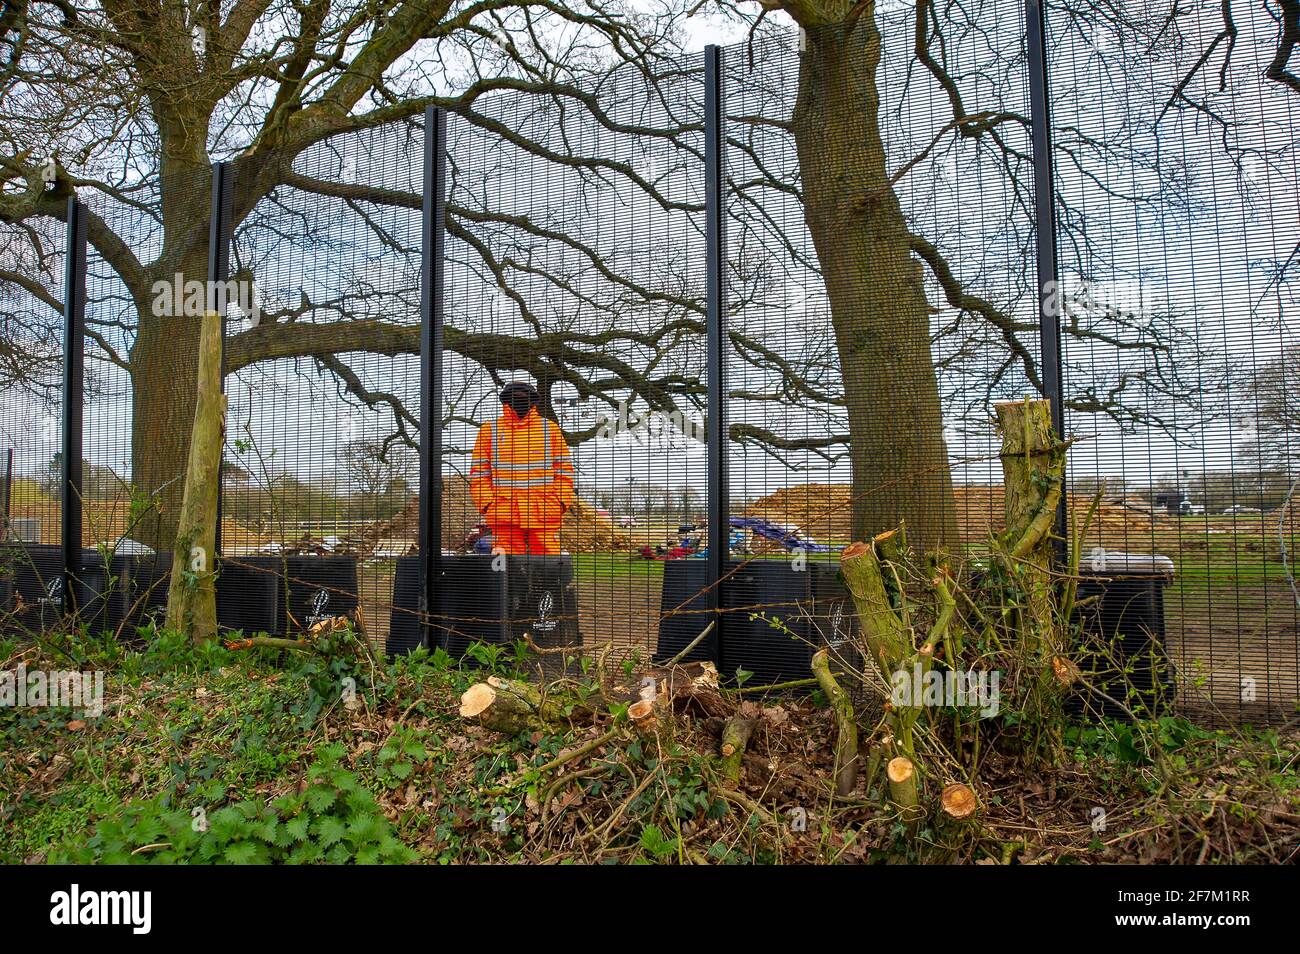 Great Missenden, UK. 3rd April, 2021. HS2 have put high security fencing in the fields next to houses near to the historical sunken holloway of Leather Lane. HS2 have destroyed a number of iconic and much loved oak trees as well as ancient hedgerows along Leather Lane. HS2 will be felling more oaks off Leather Lane too. HS2 Security are in the fields next to the oaks 24/7 and intimidating local residents and members of the public. The High Speed 2 rail link from London to Birmingham is carving a huge ugly scar across the Chilterns which is an AONB. Credit: Maureen McLean/Alamy Stock Photo